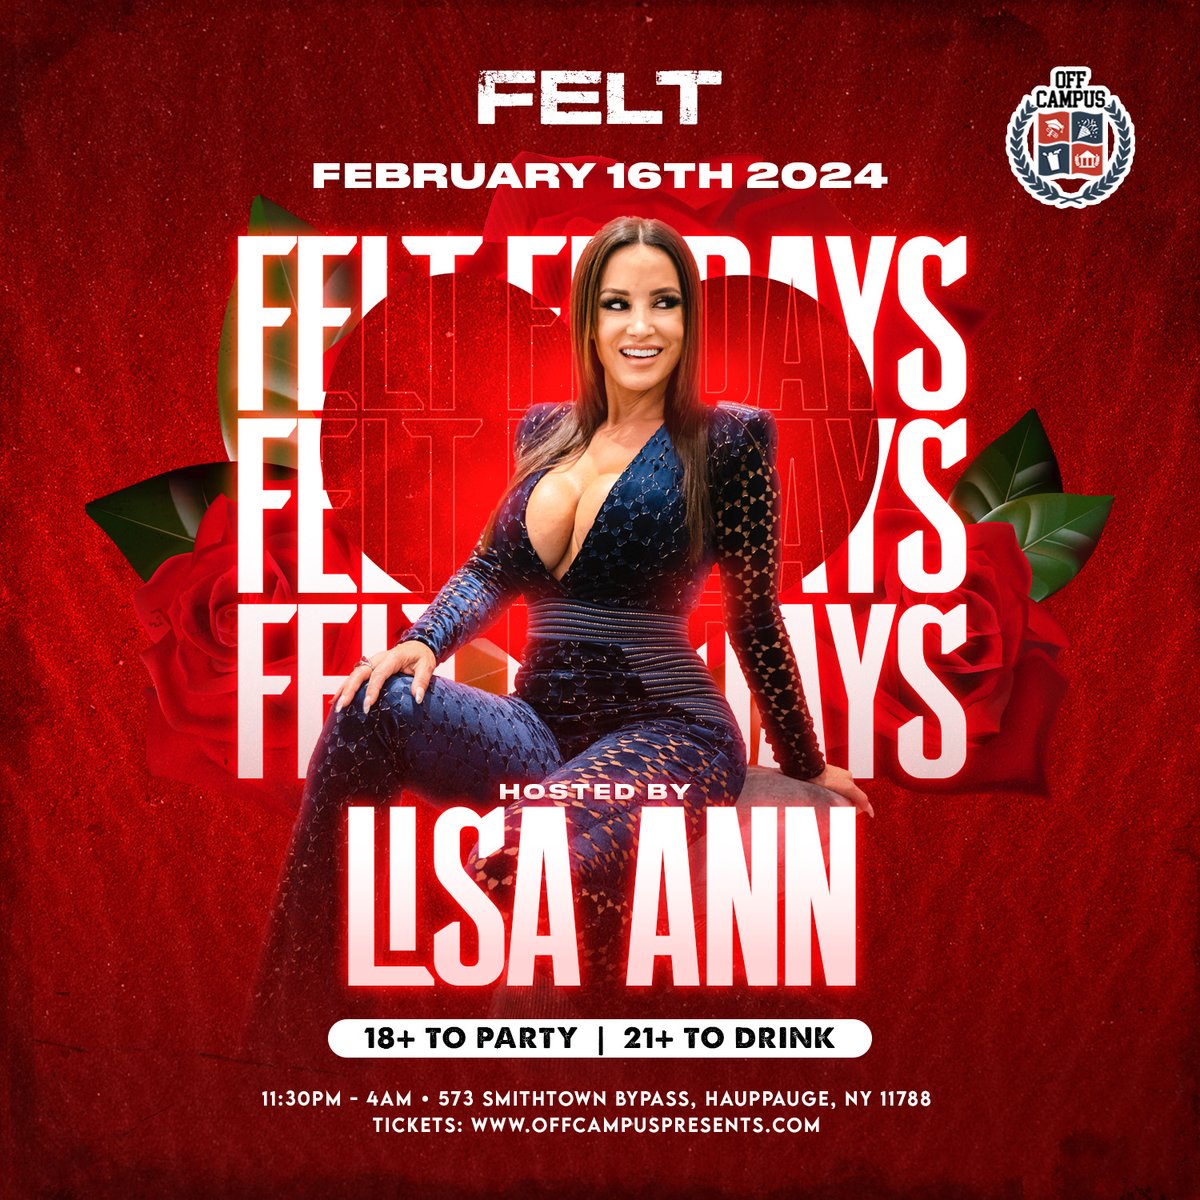 🔥 Ready to kick off the weekend on Feb 16th? Join ME, your host, at FELT Night Club for OFF CAMPUS presents FELT Friday – the place to be for the best vibes in Long Island #FeltFriday #TheRealLisaAnn #ClubVibes #FELT

Tickets: eventbrite.com/e/lisa-ann-fel…